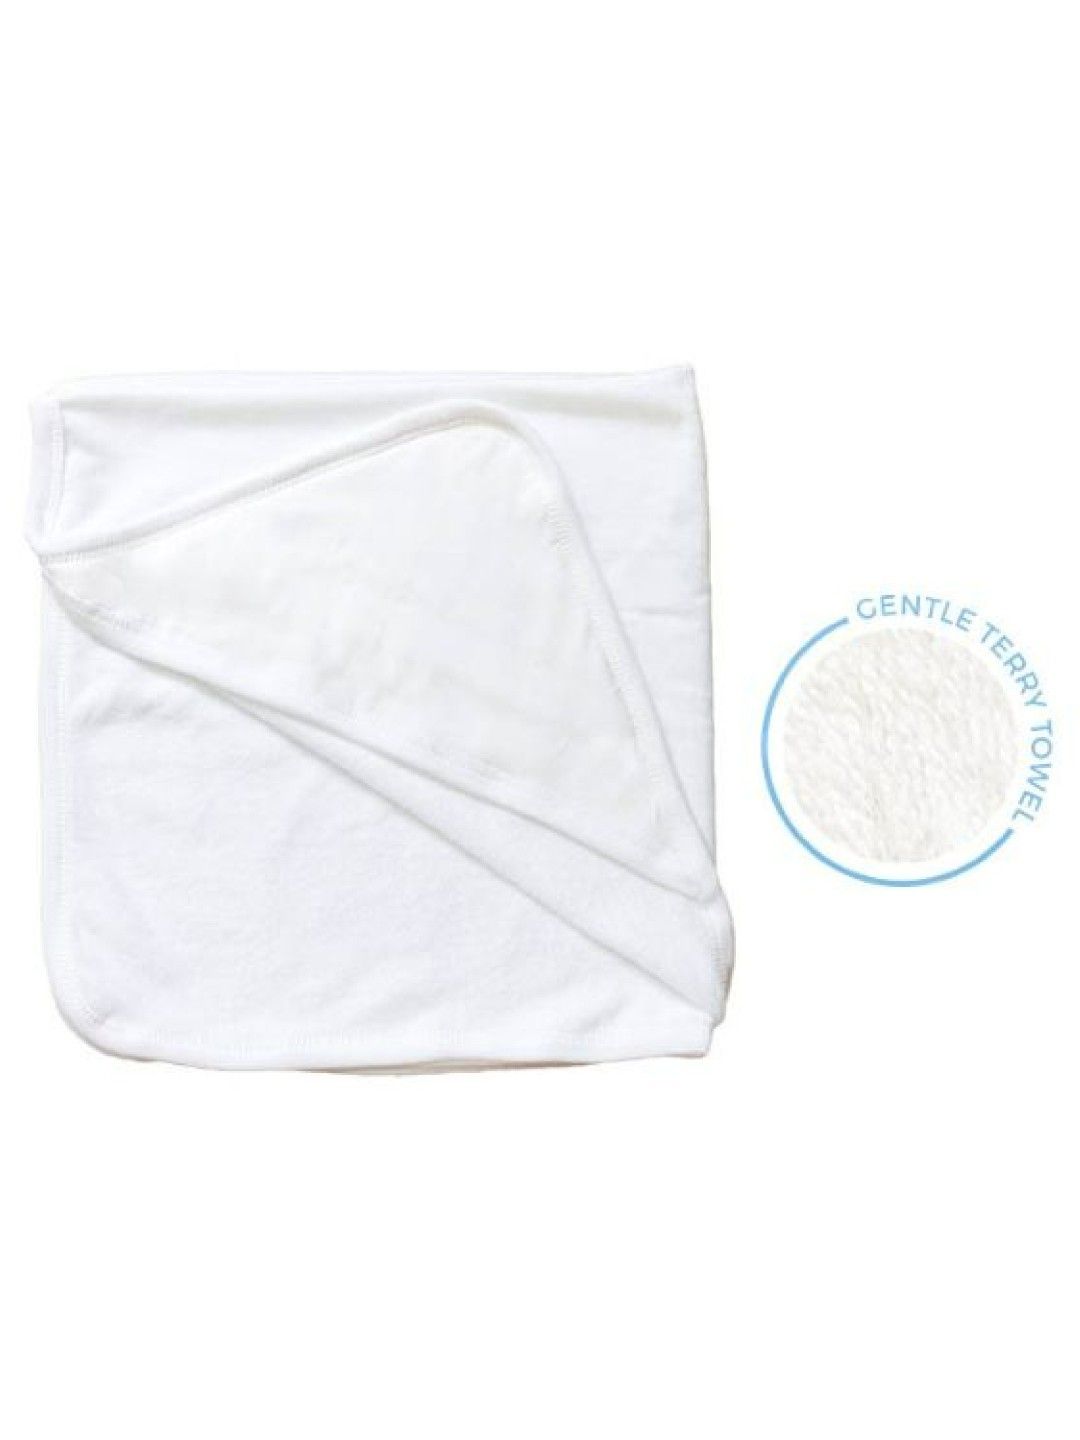 Cotton Central™ Gentle Terry Hooded Towel 100% USA Cotton